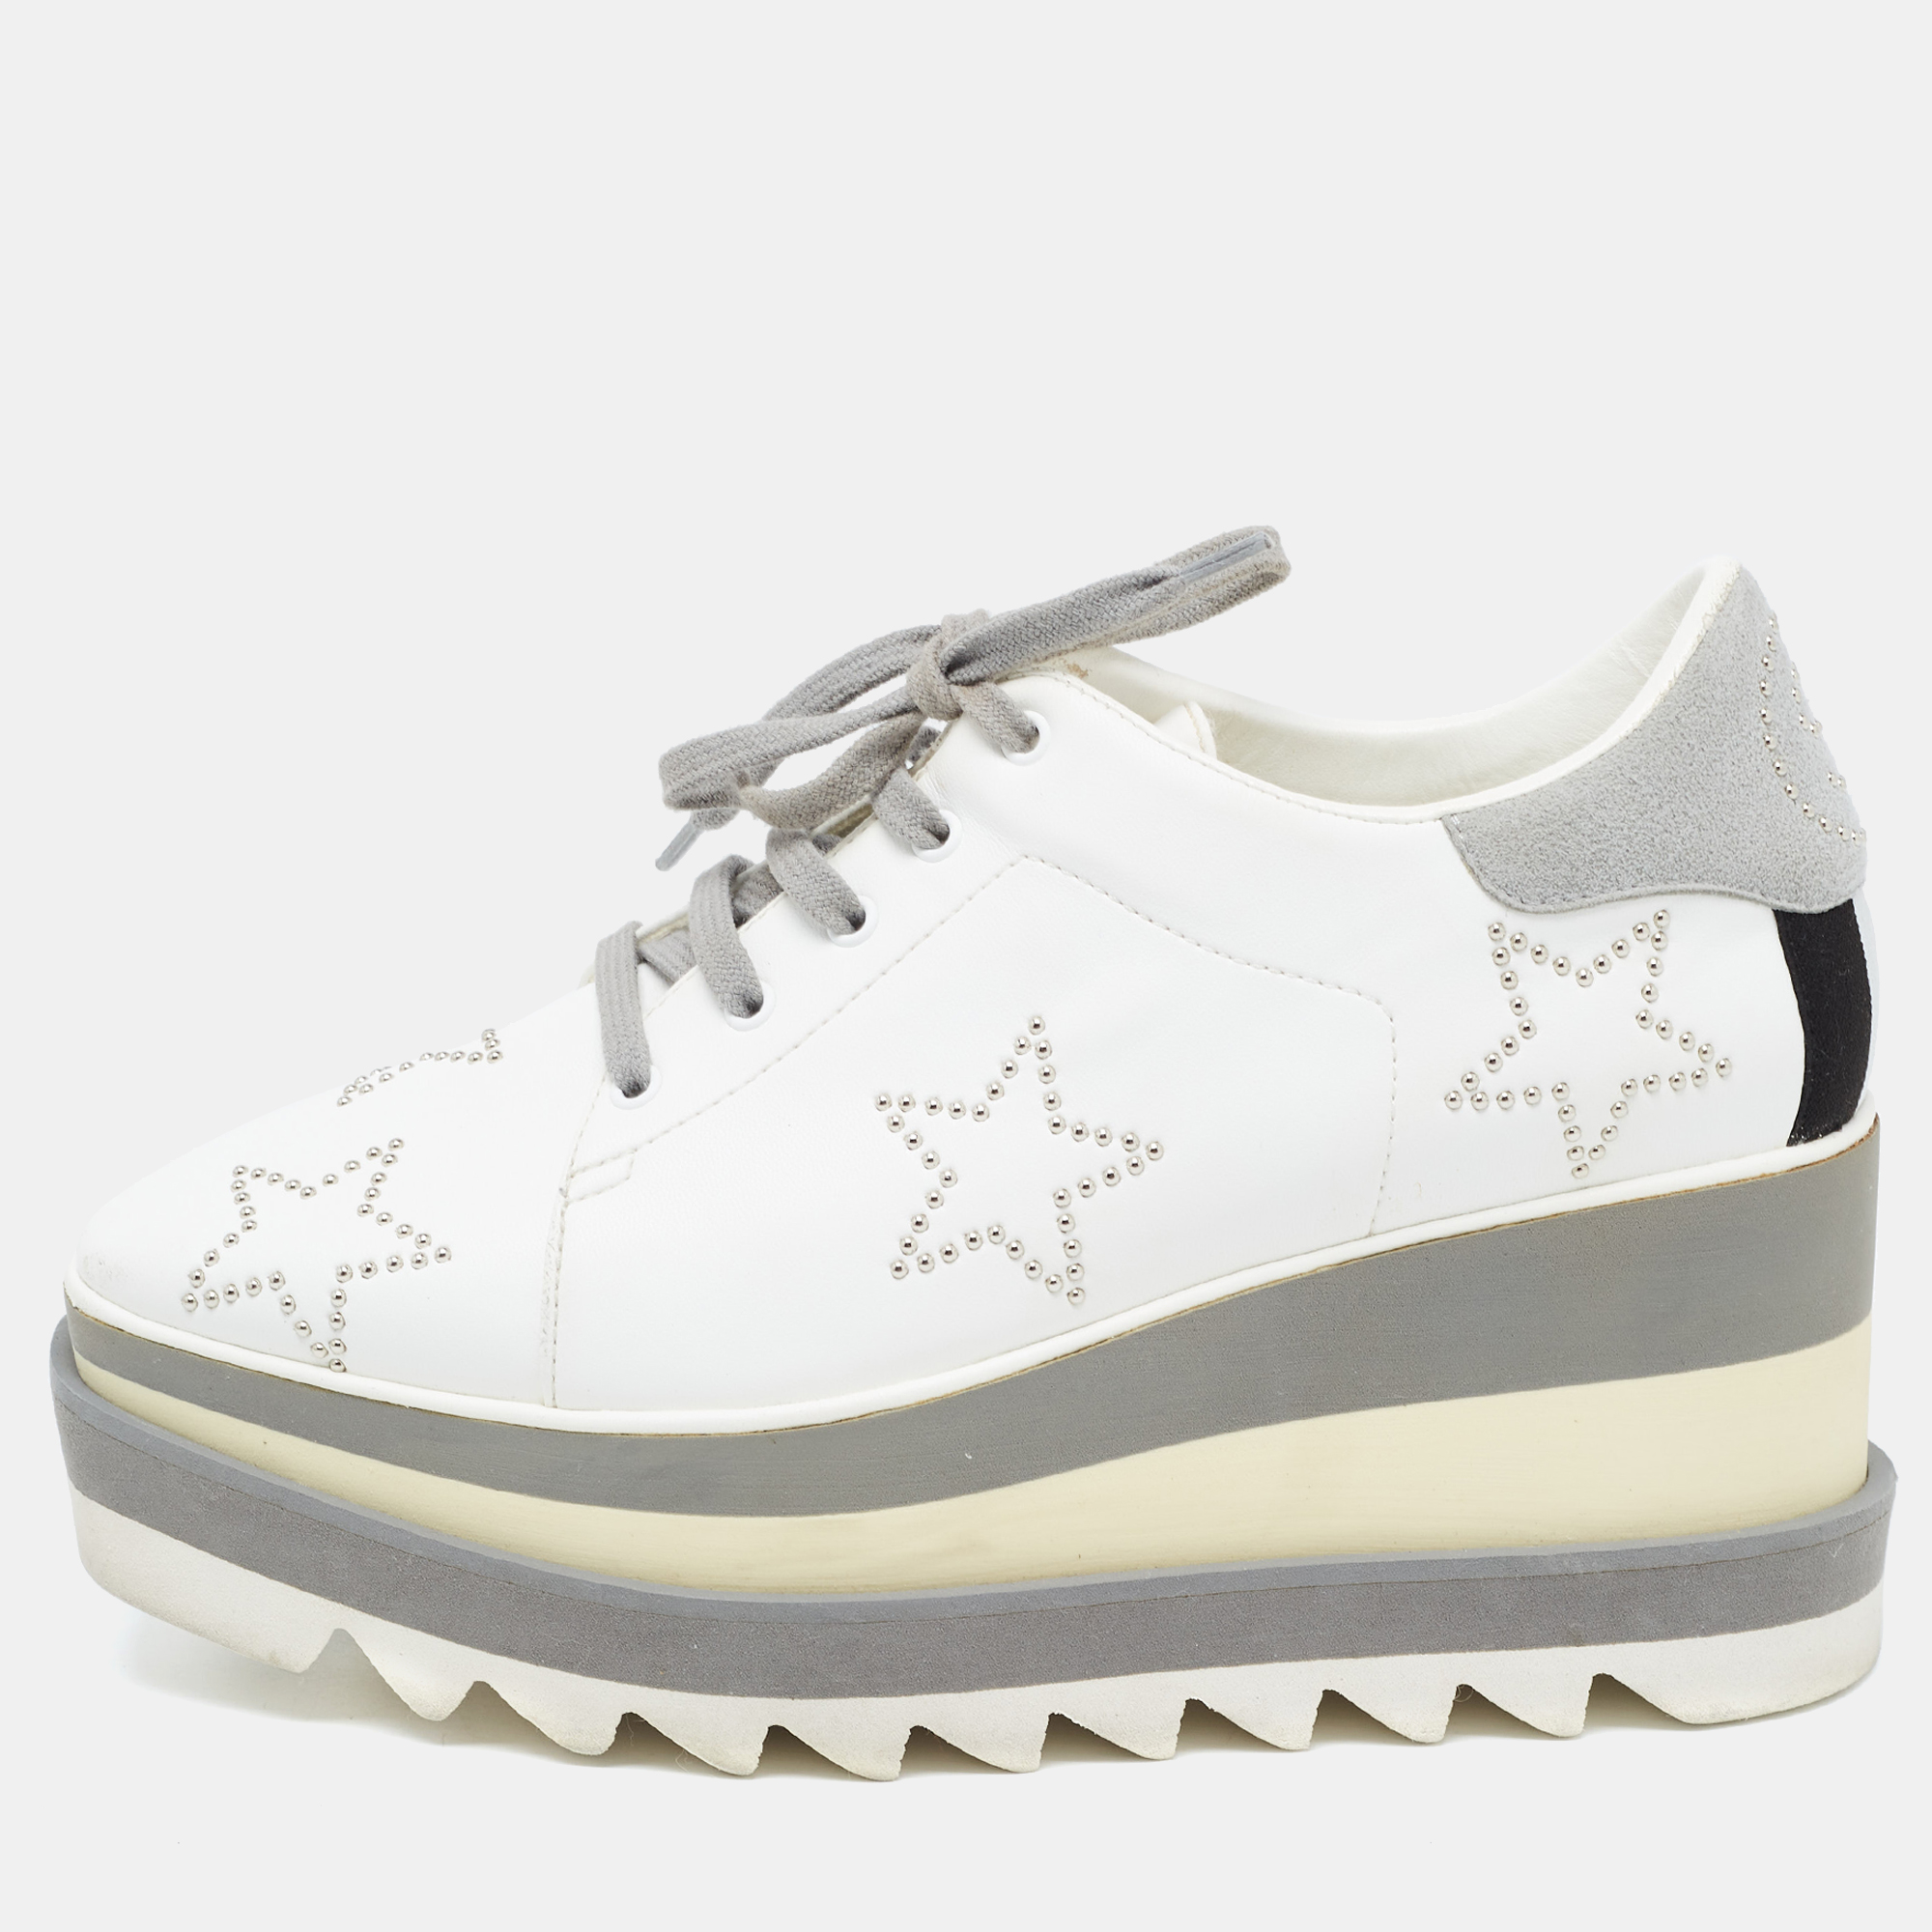 Stella McCartney White/Grey Faux Leather And Suede Elyse Star Sneakers Size 36